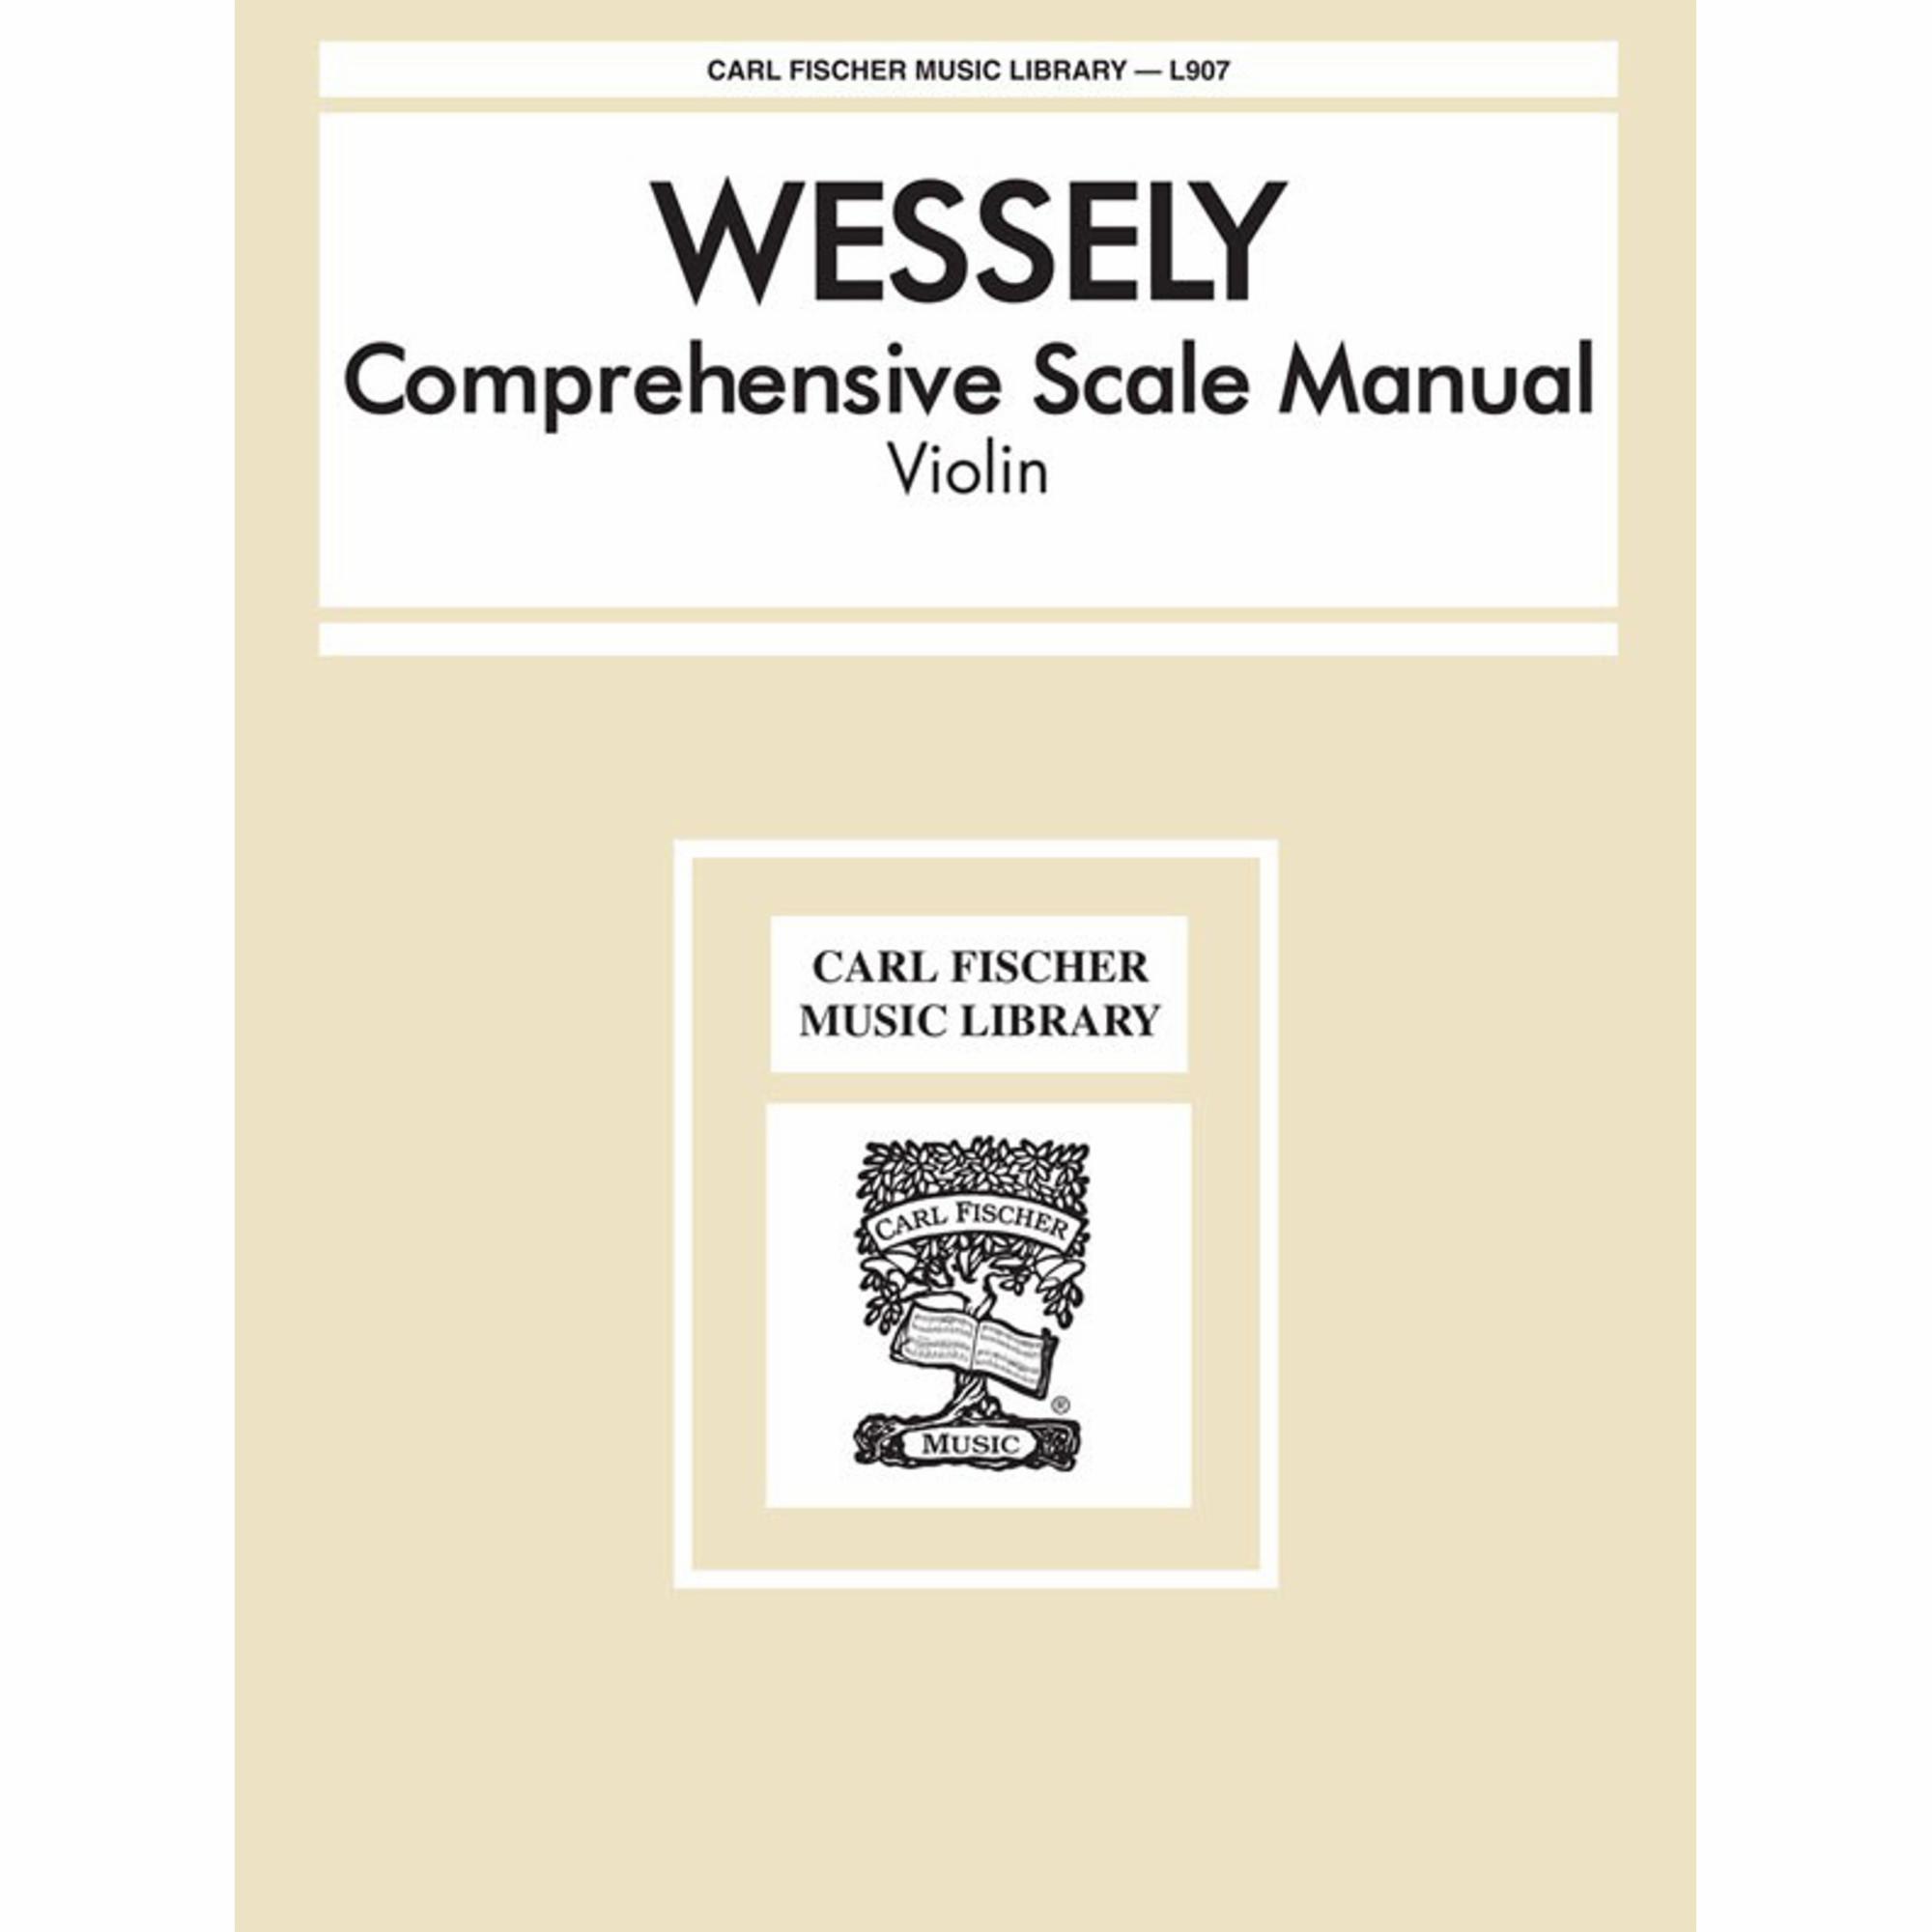 Wessely -- Comprehensive Scale Manual for Violin